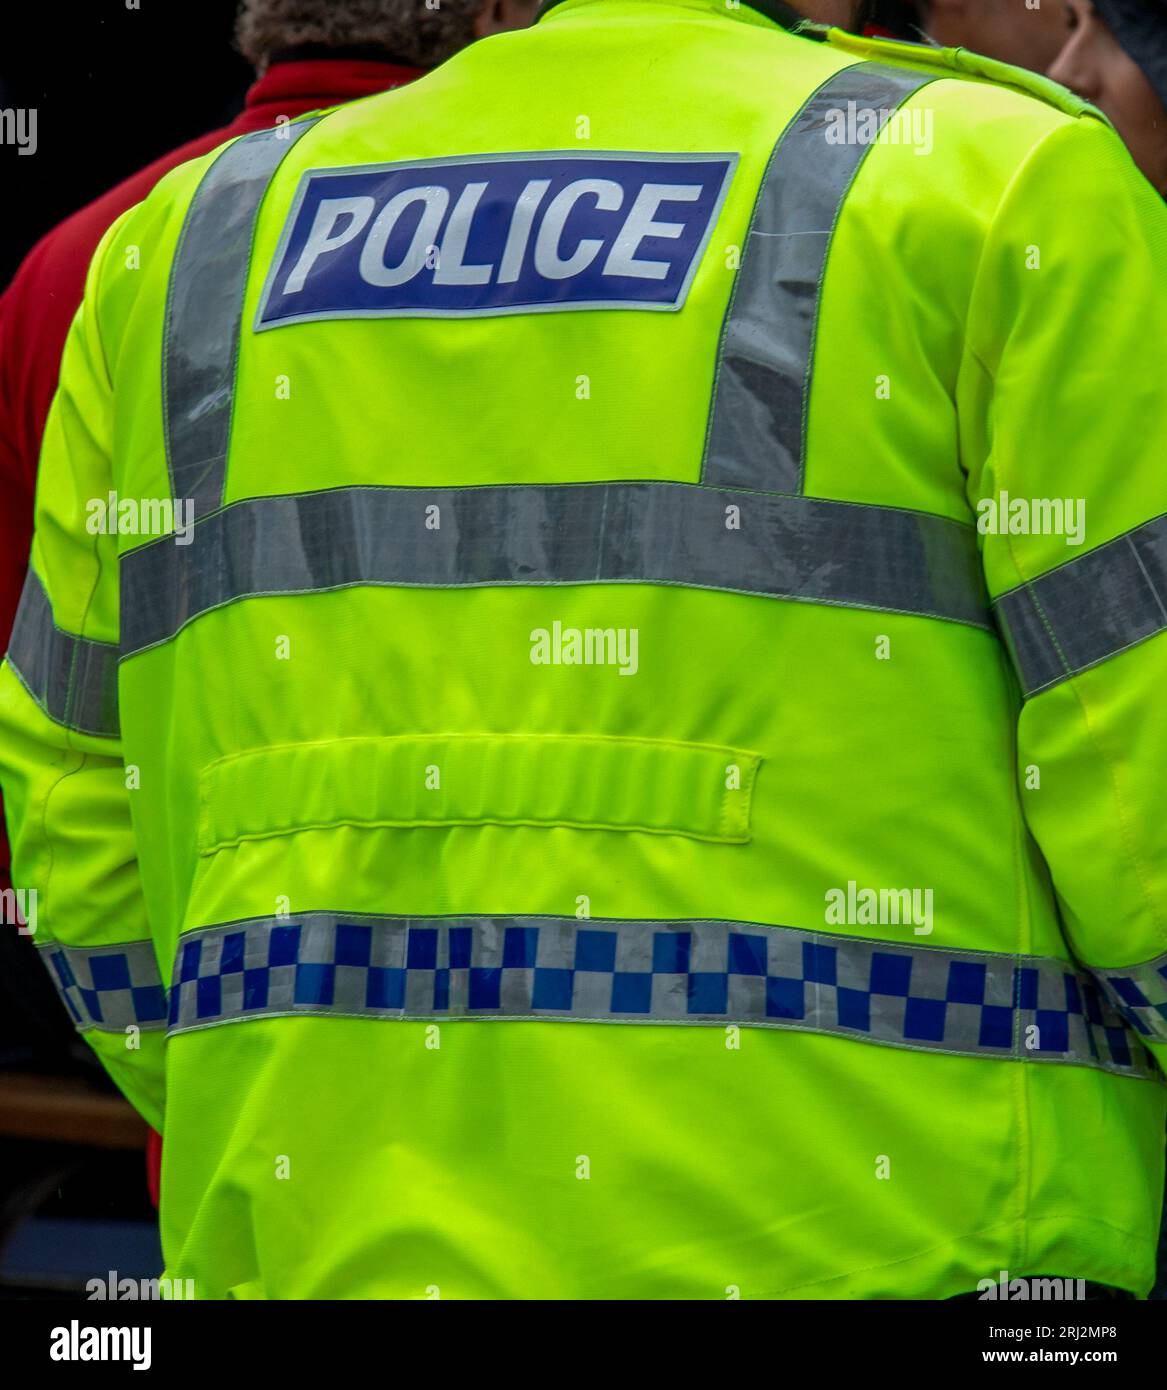 Bright yellow high visibility jacket police uniform worn by an on duty police officer Stock Photo